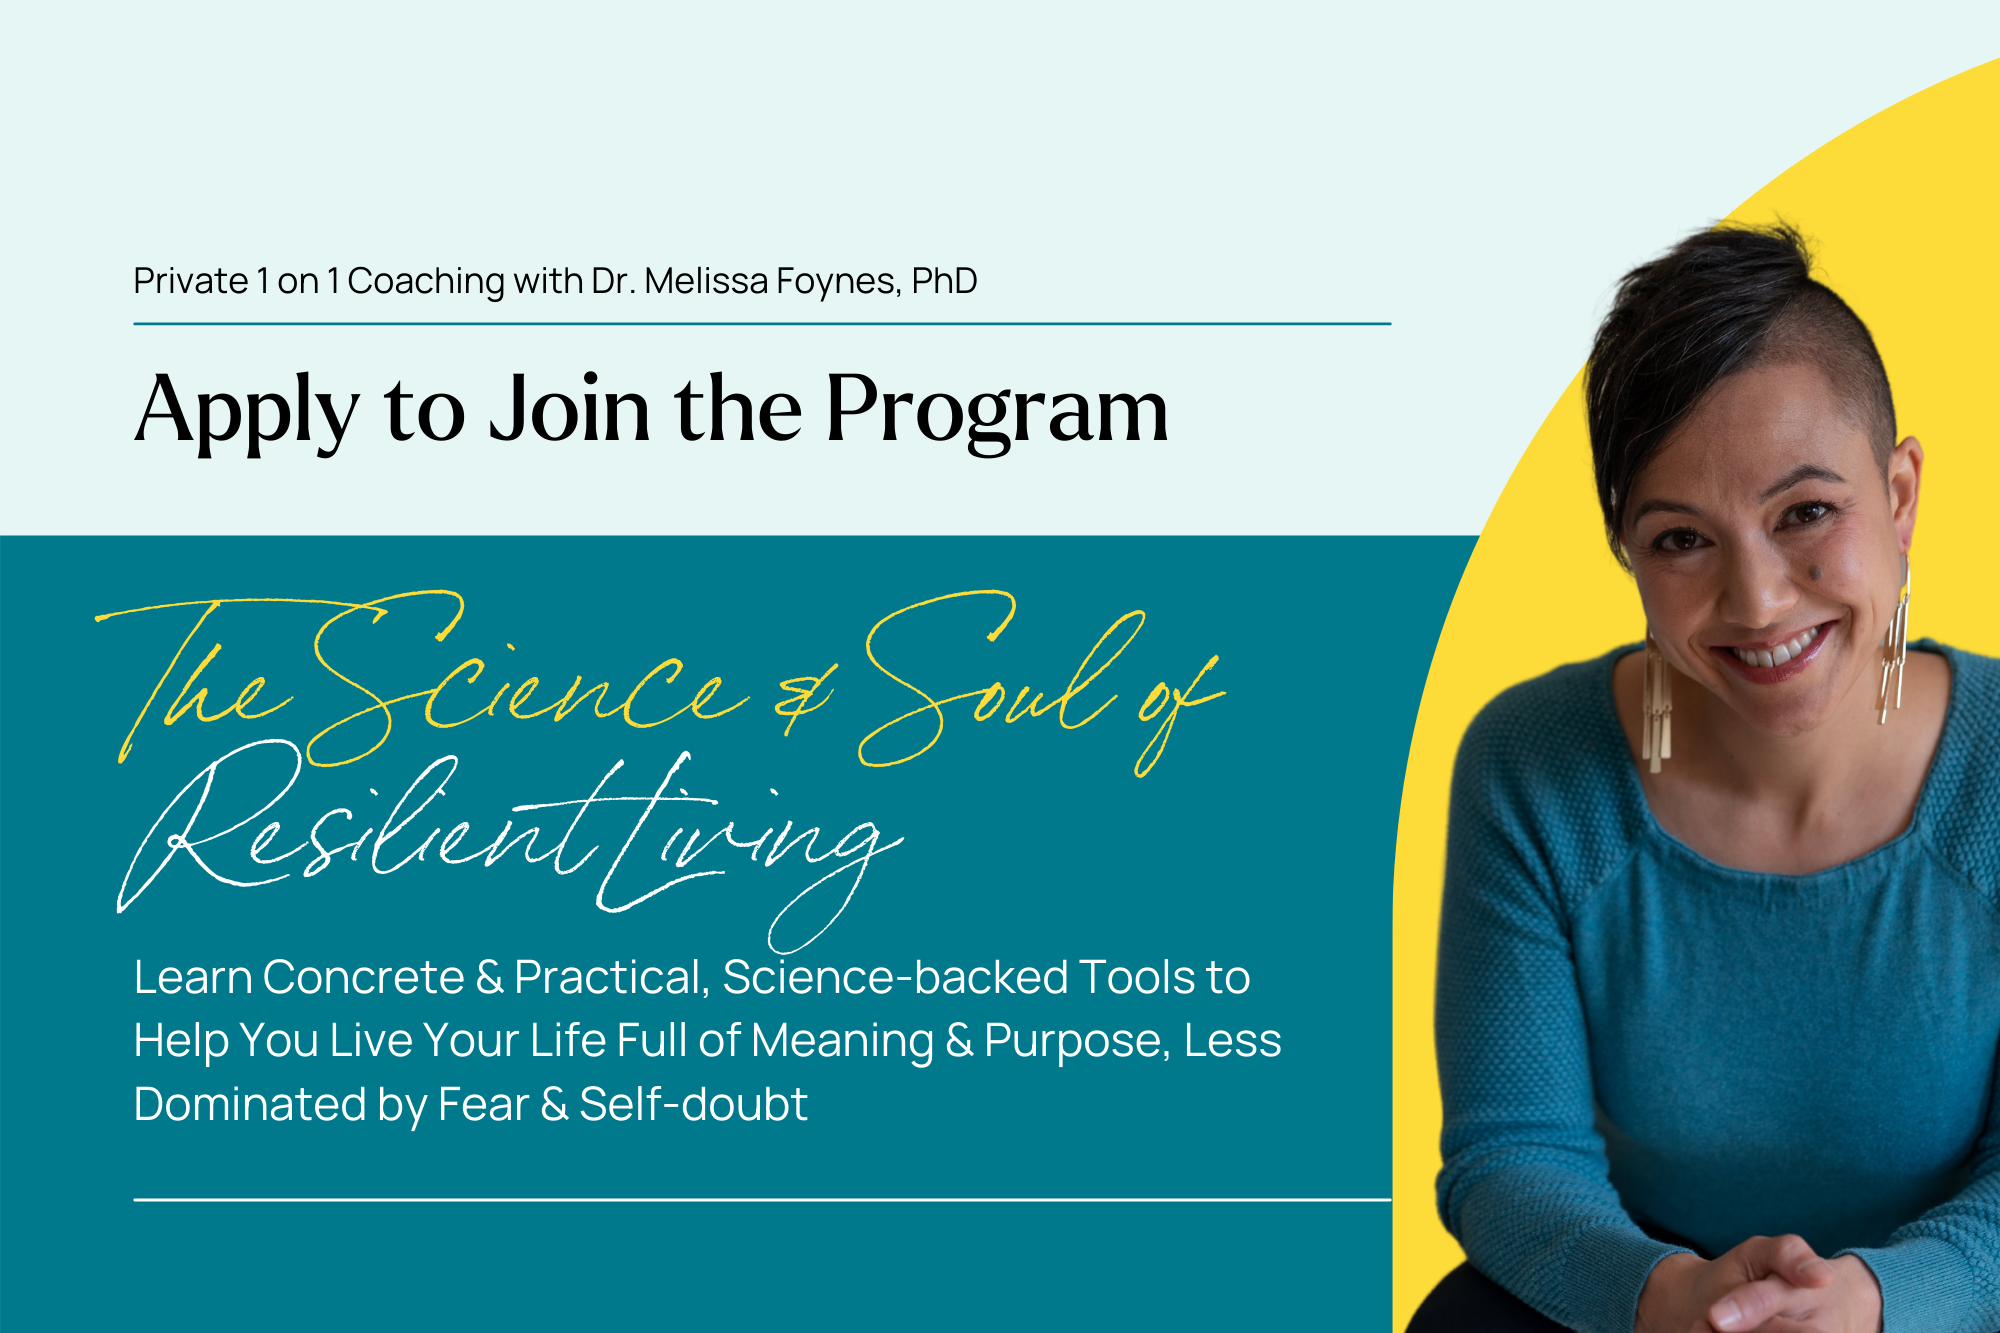 1 on 1 Coaching with Melissa Foynes, PhD - The Science & Soul of Resilient Living